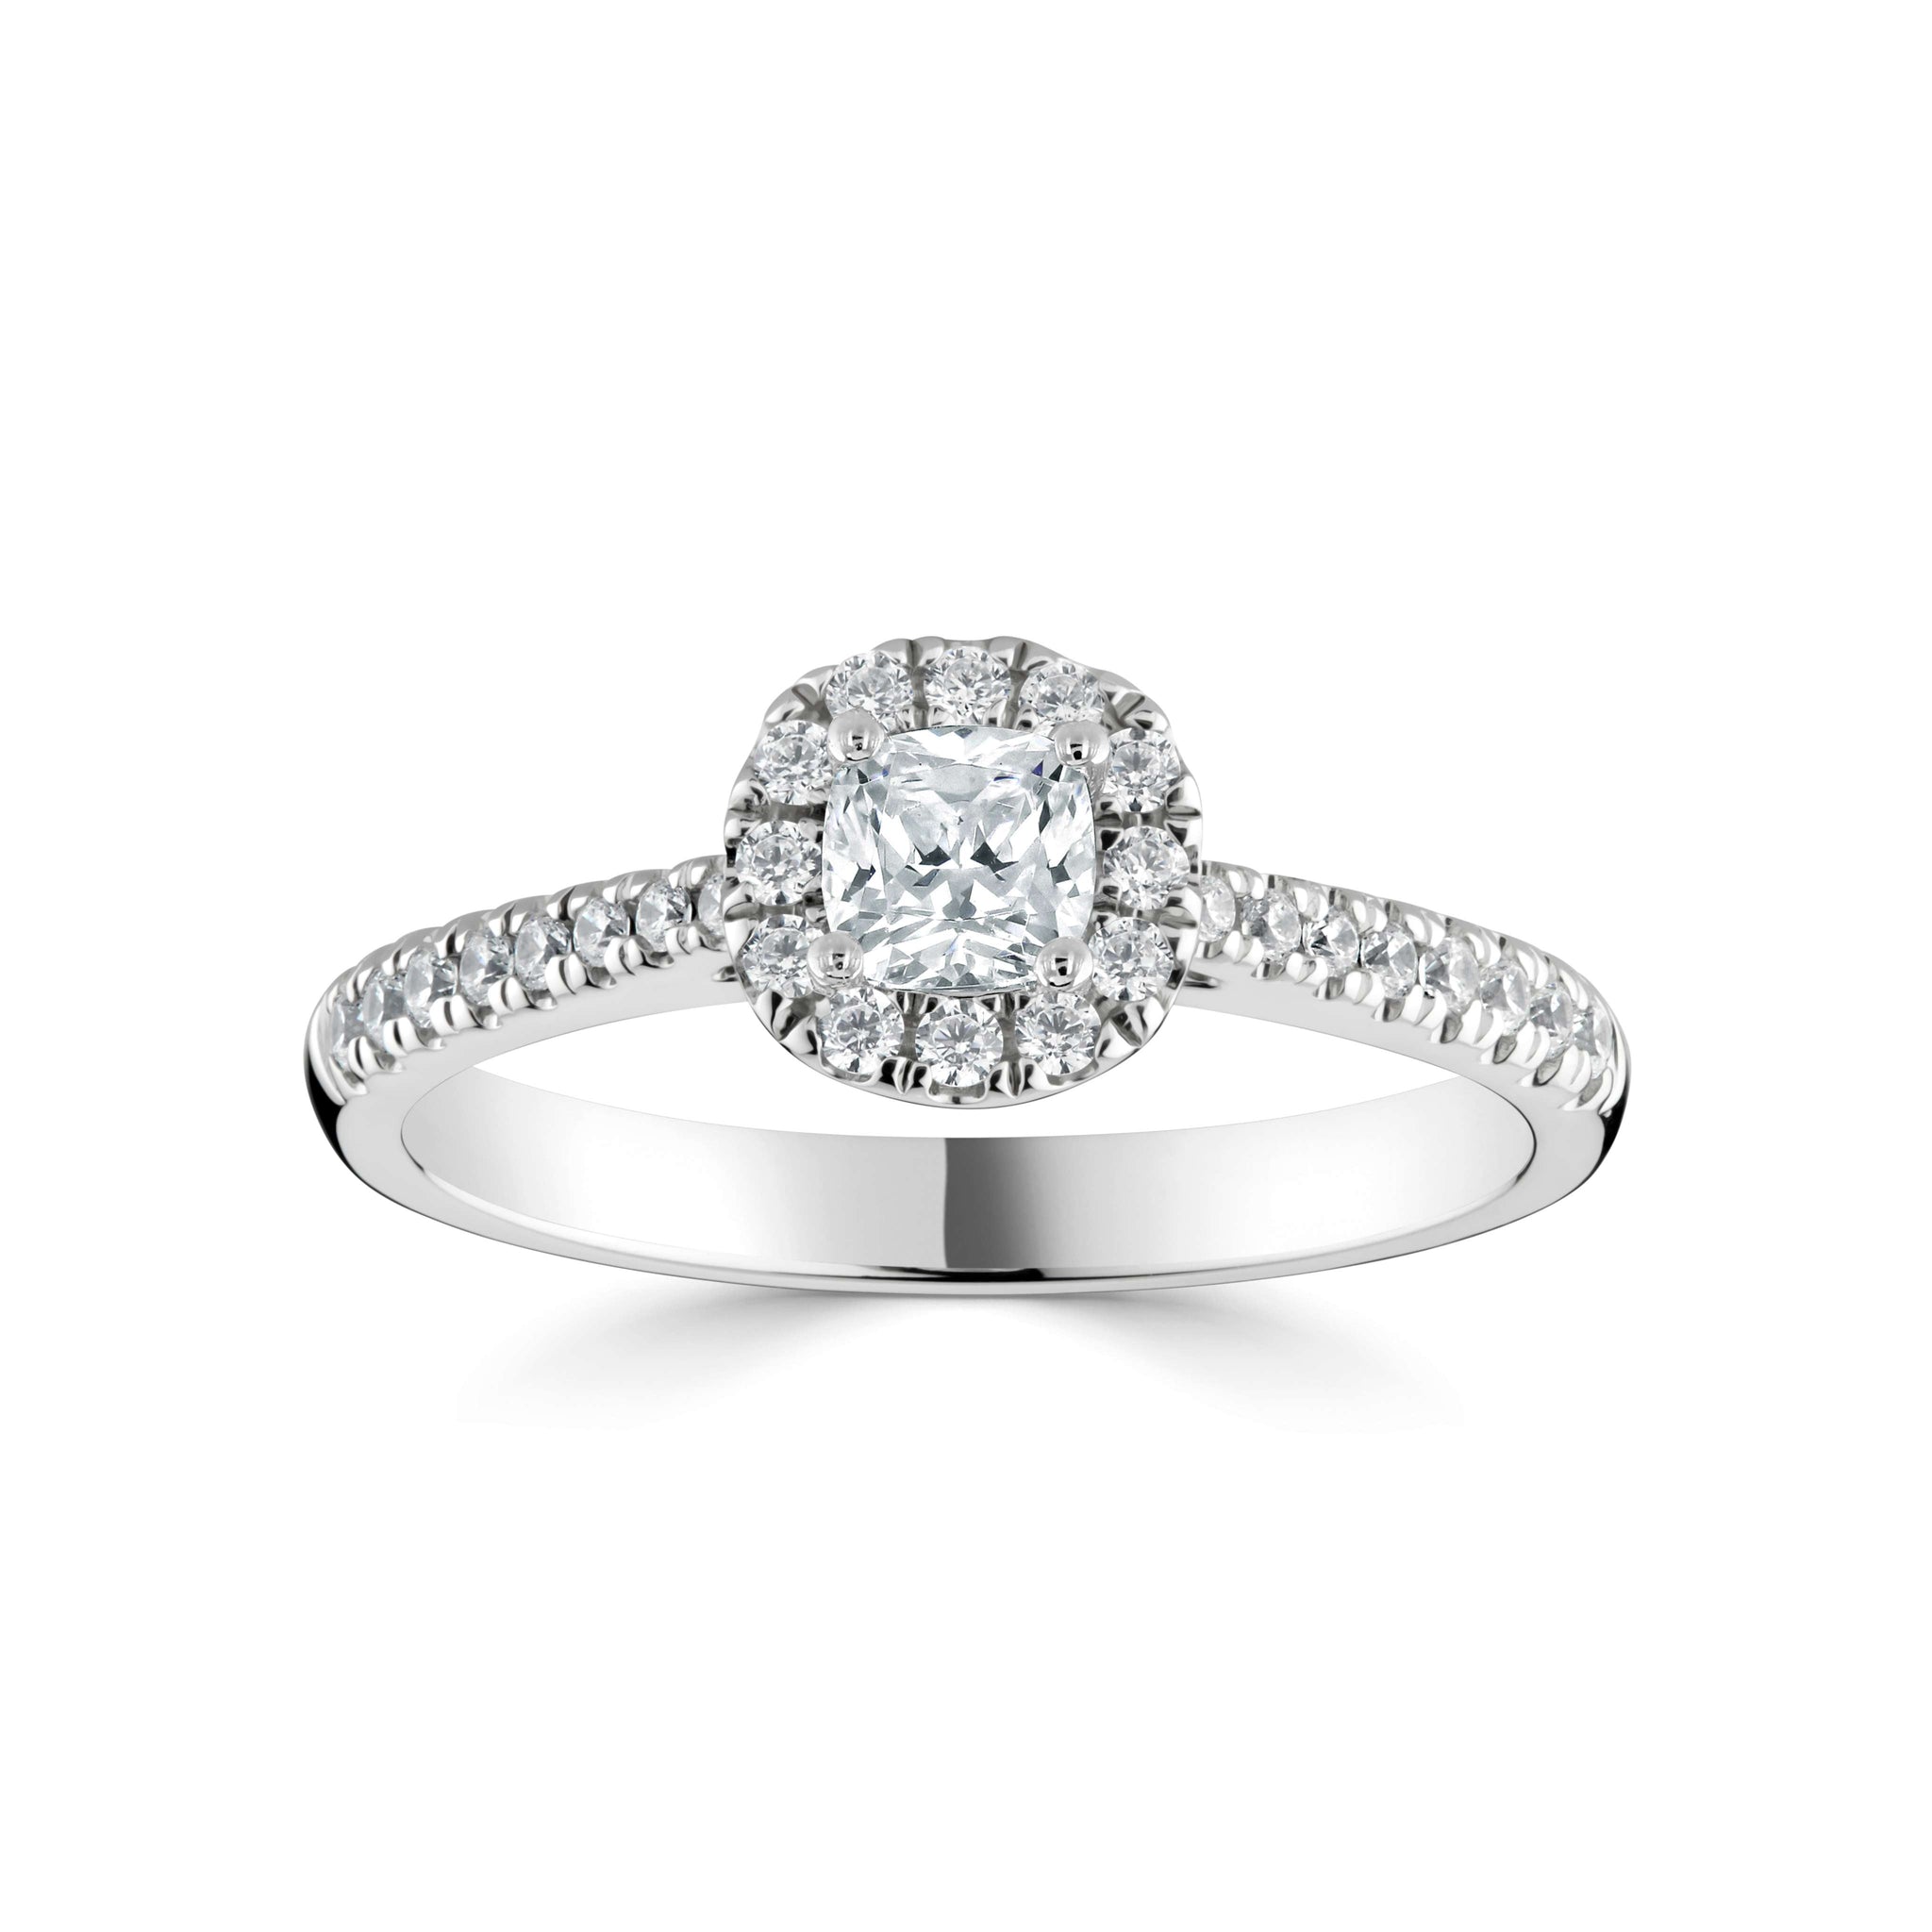 Camryn *Select a Cushion Cut Diamond 0.25ct or above